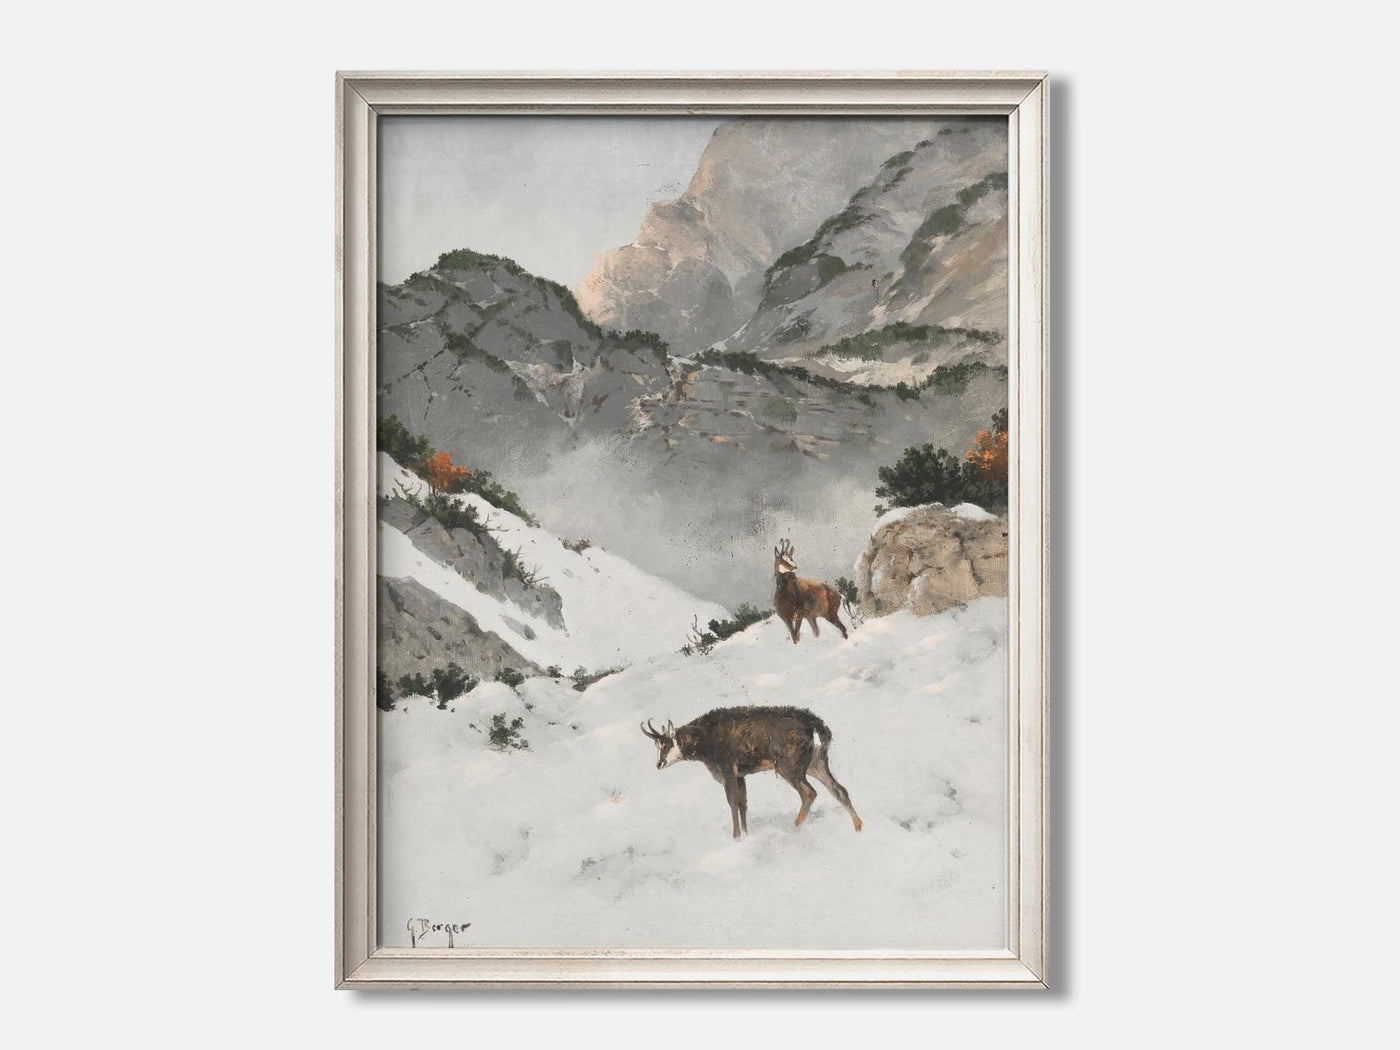 Chamois in the high mountains mockup - A_w27-V1-PC_F+O-SS_1-PS_5x7-C_def variant